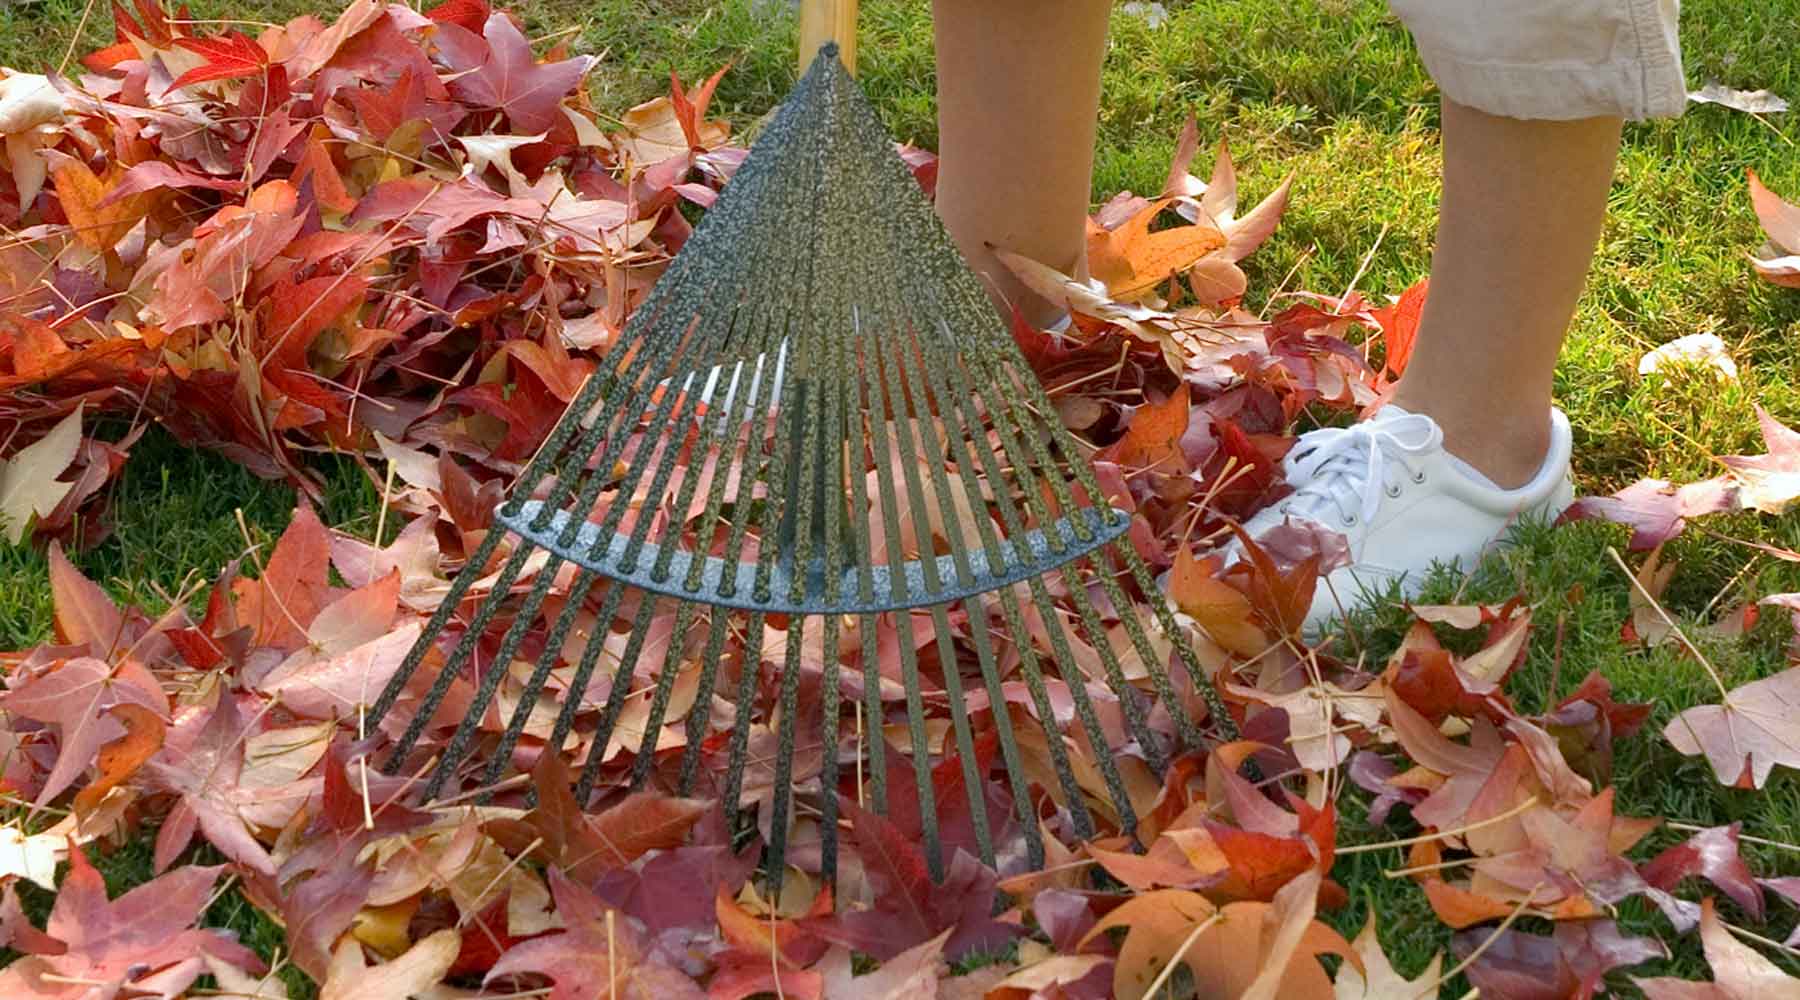 Lawn Cleanup – Complete Guide to Rakes & Mulching